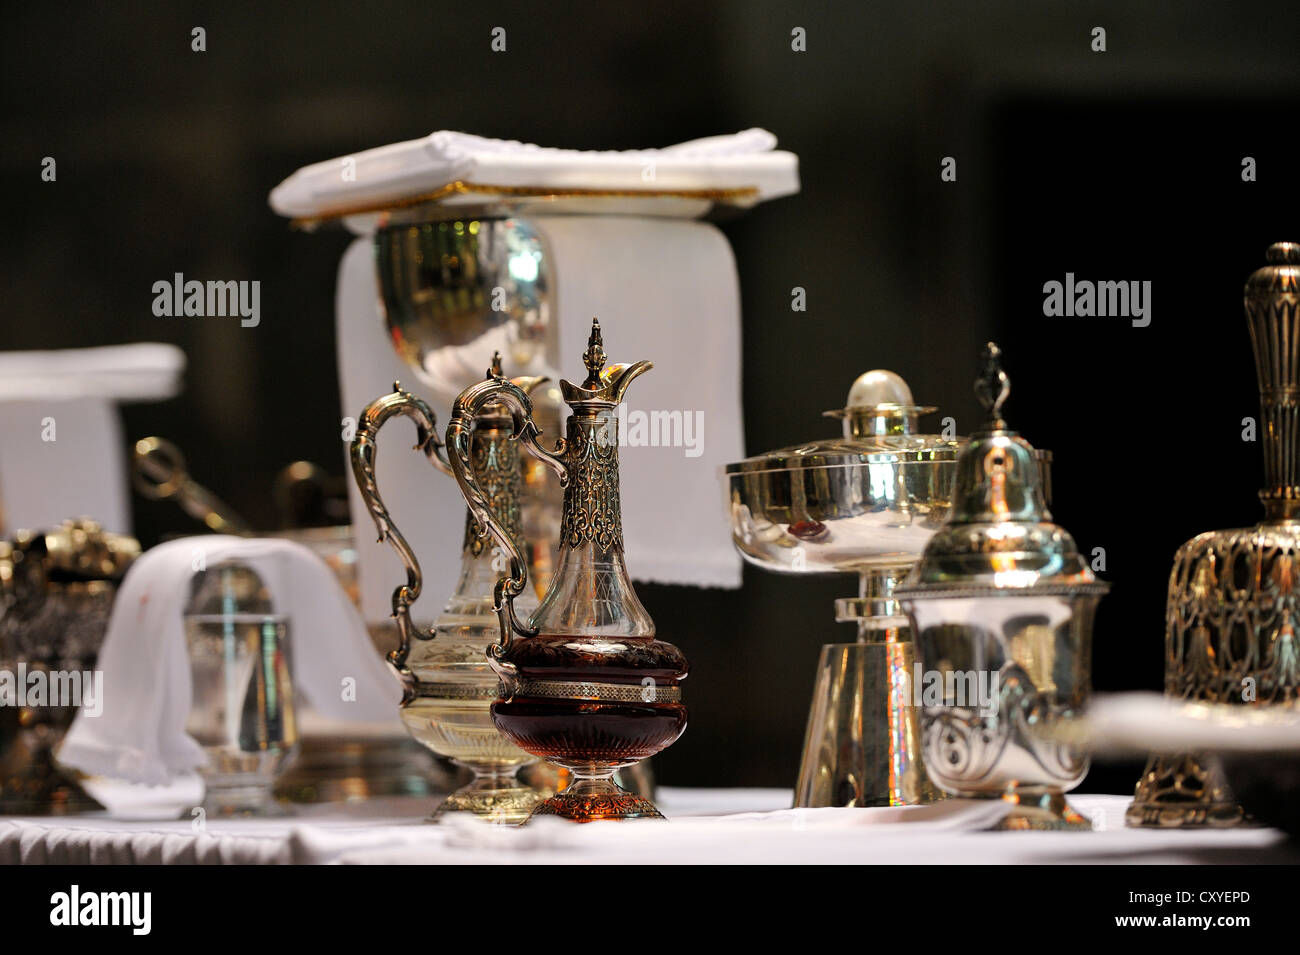 Credence table with the liturgical items, Cathedral Metropolitana, Rio de Janeiro, Brazil, South America Stock Photo